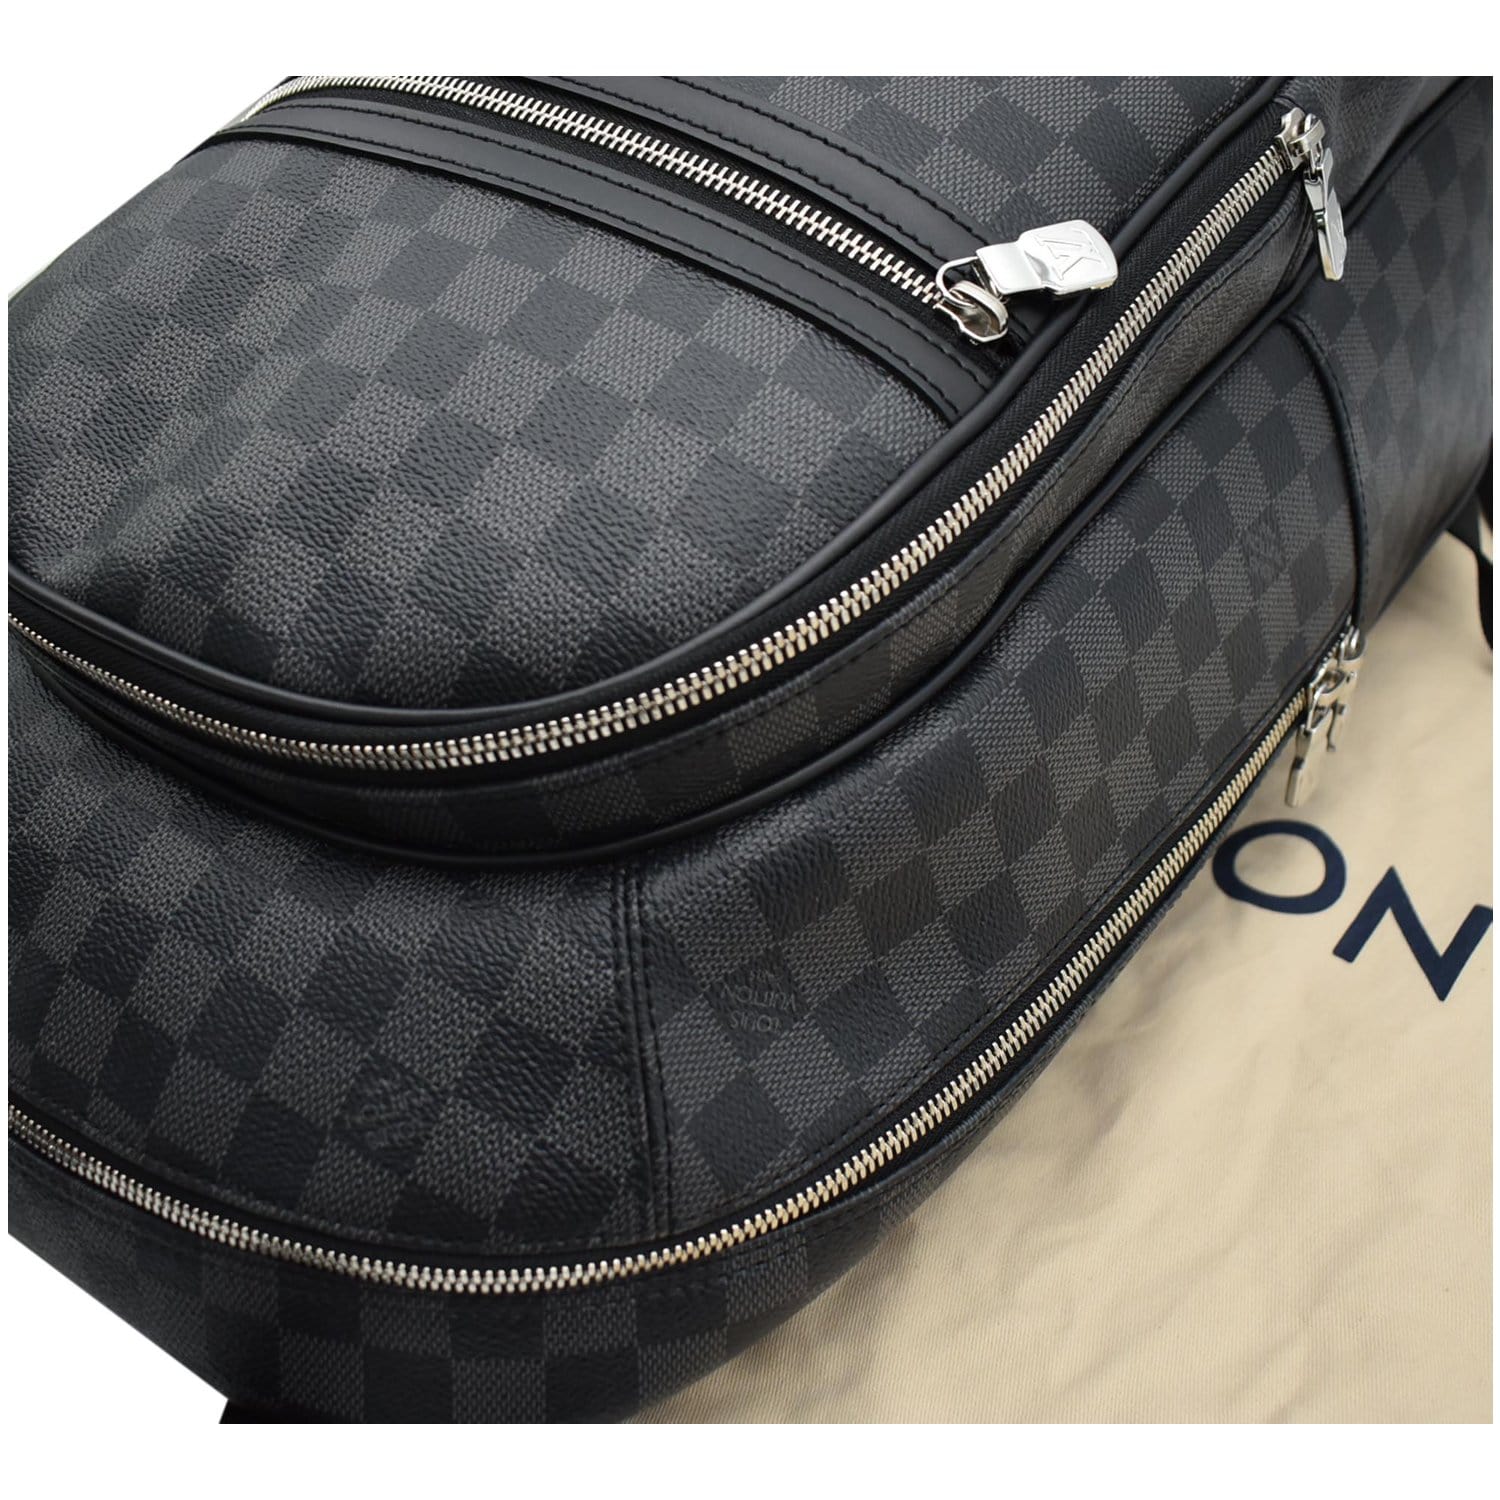 Louis Vuitton Onyx Damier Infini Leather Michael NM Backpack Bag